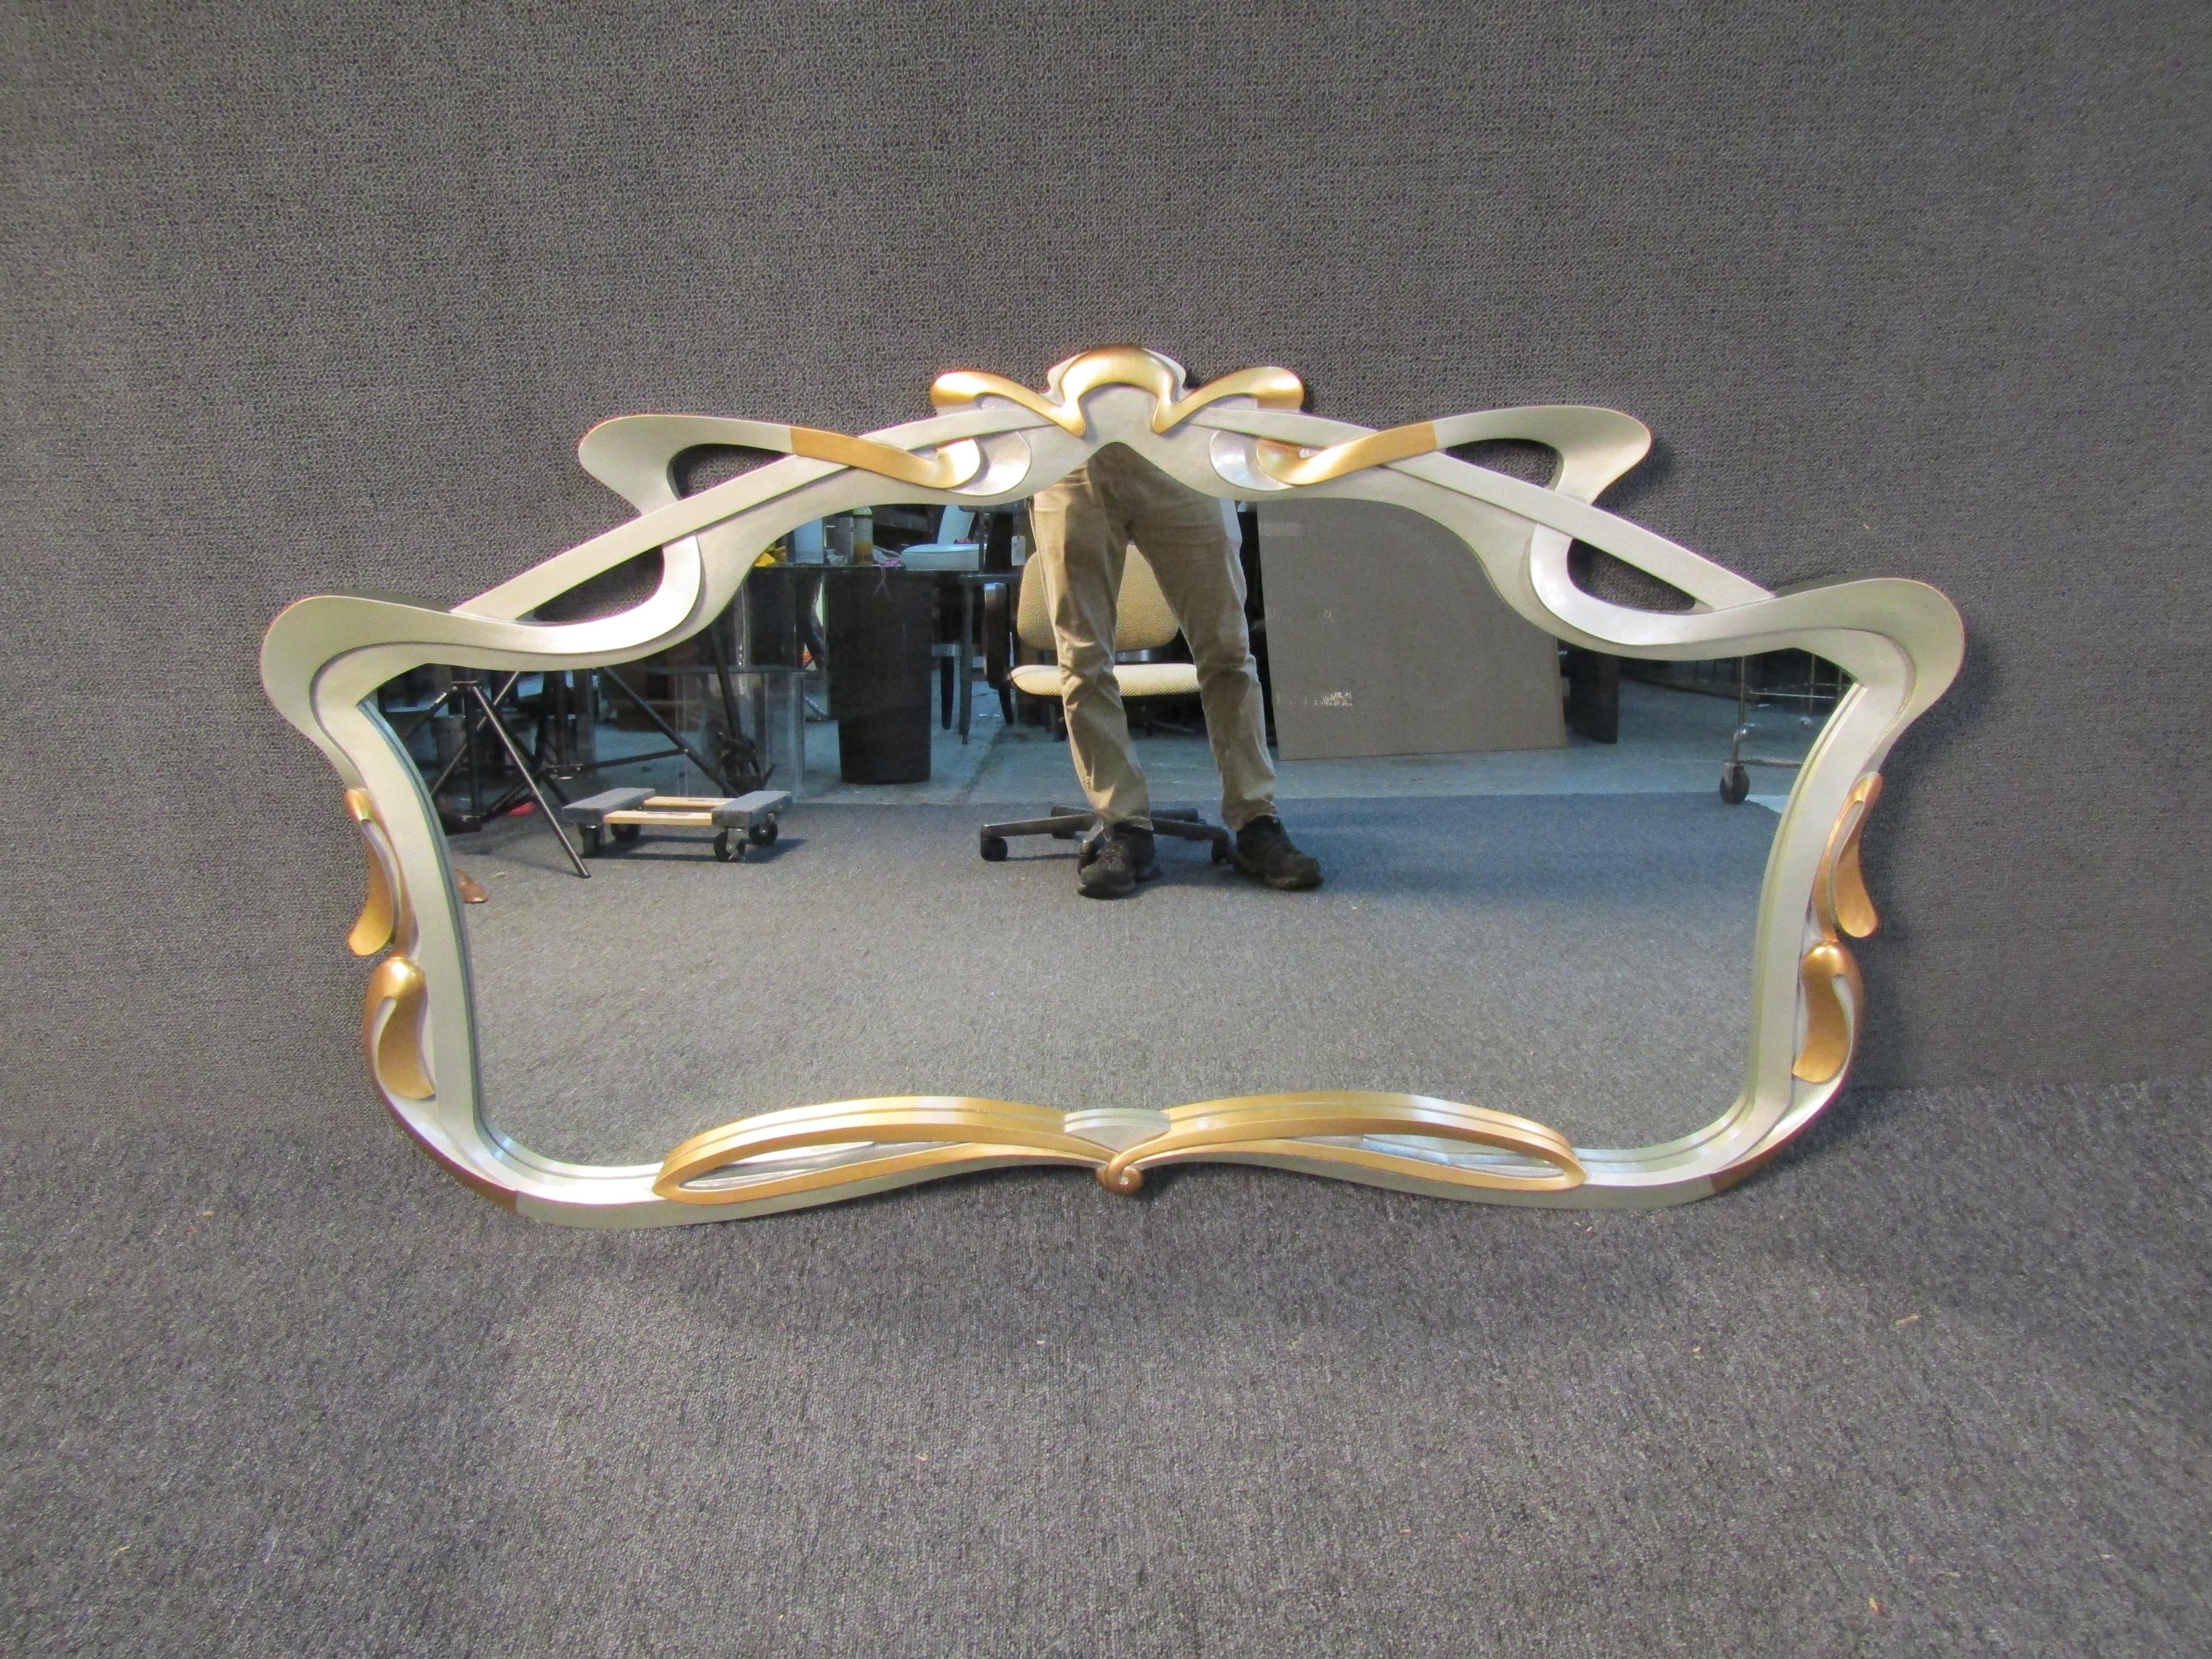 Warm and whimsical, this elegant wall mirror brims with vintage allure. Its fantasy-like approach and detailed curvature allow it to Stand out in any home or office. Please confirm item location (NY or NJ) with dealer.